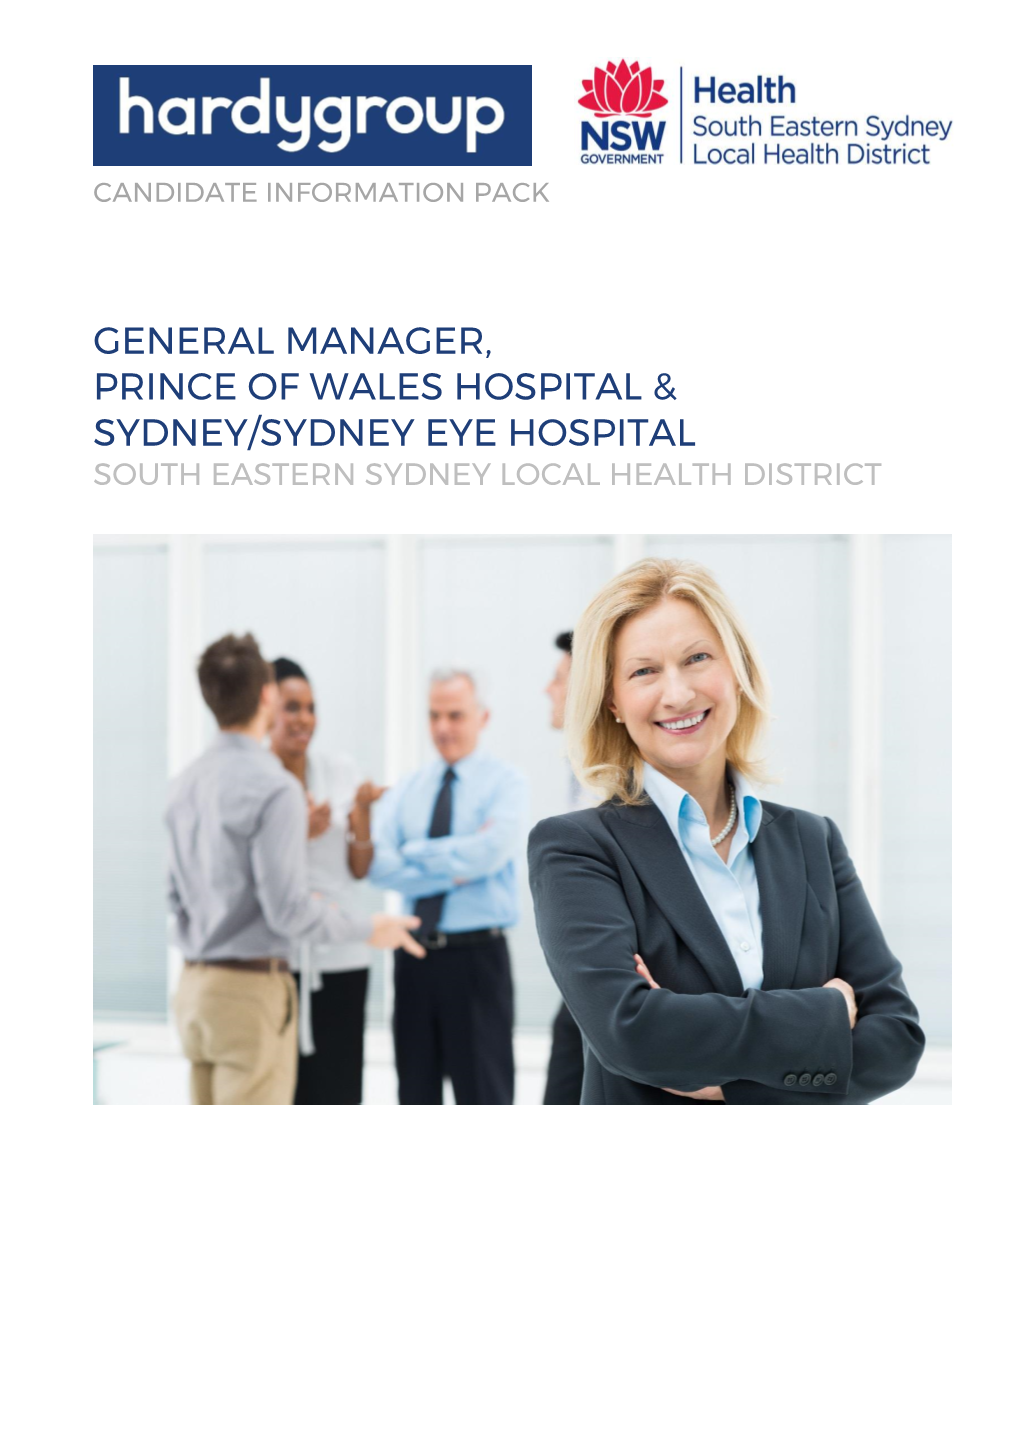 General Manager, Prince of Wales Hospital & Sydney